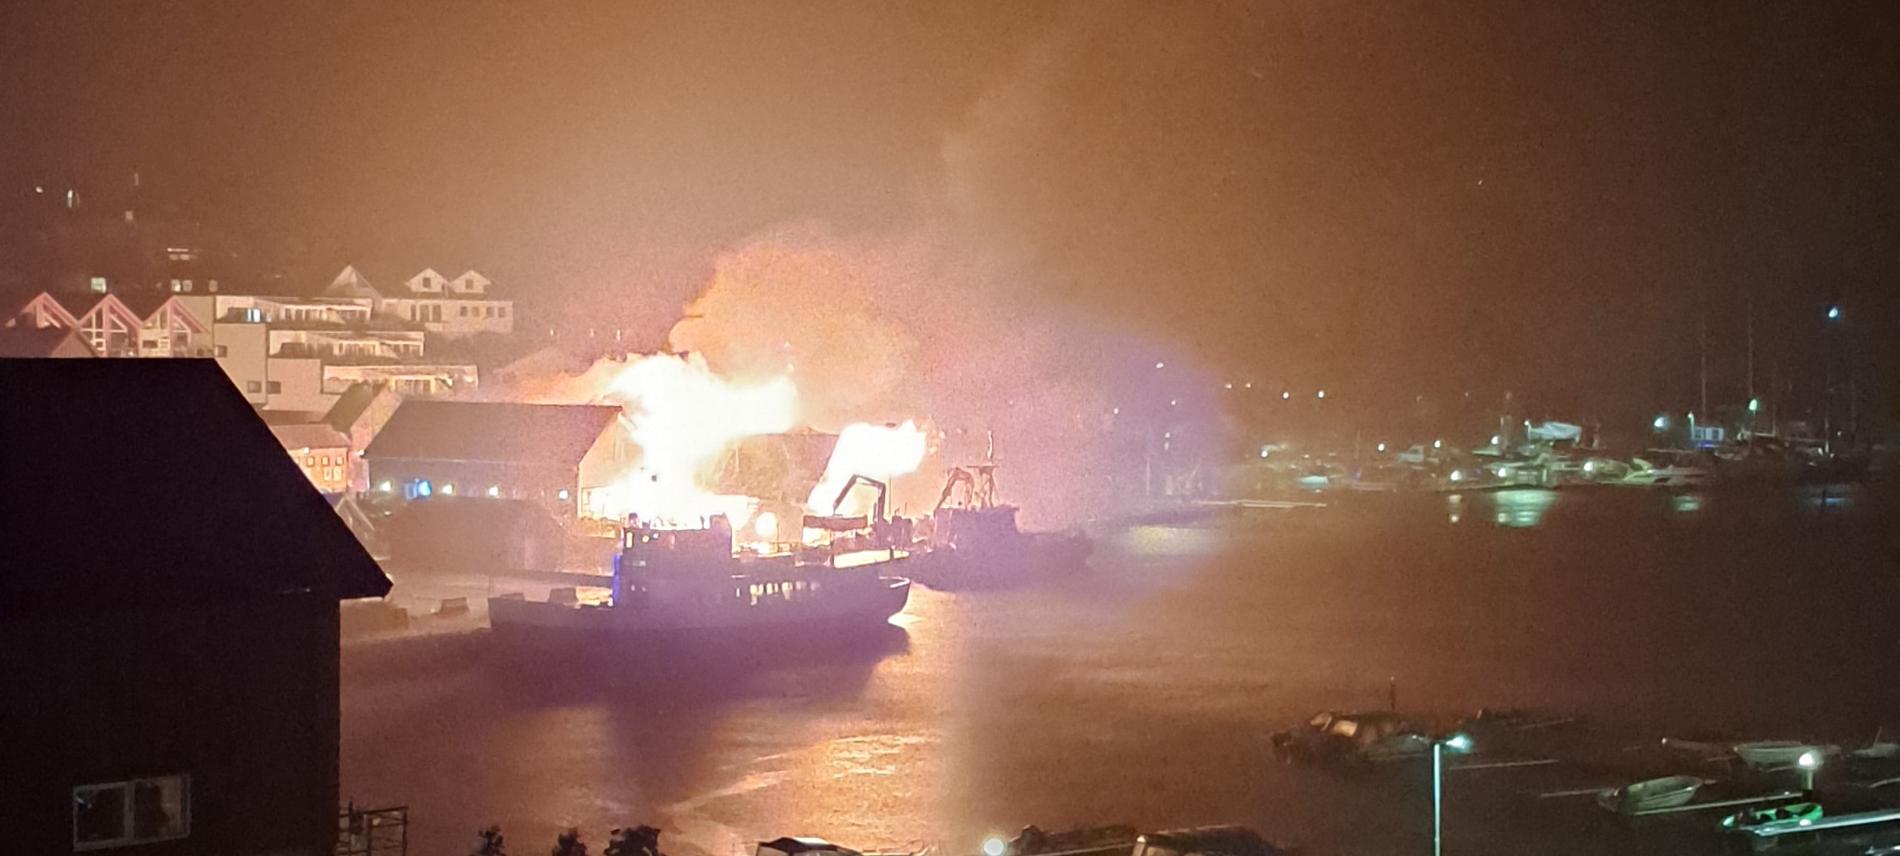 Multiple Sea Houses on Fire in Hommersåk: Urgent Situation at the Harbor